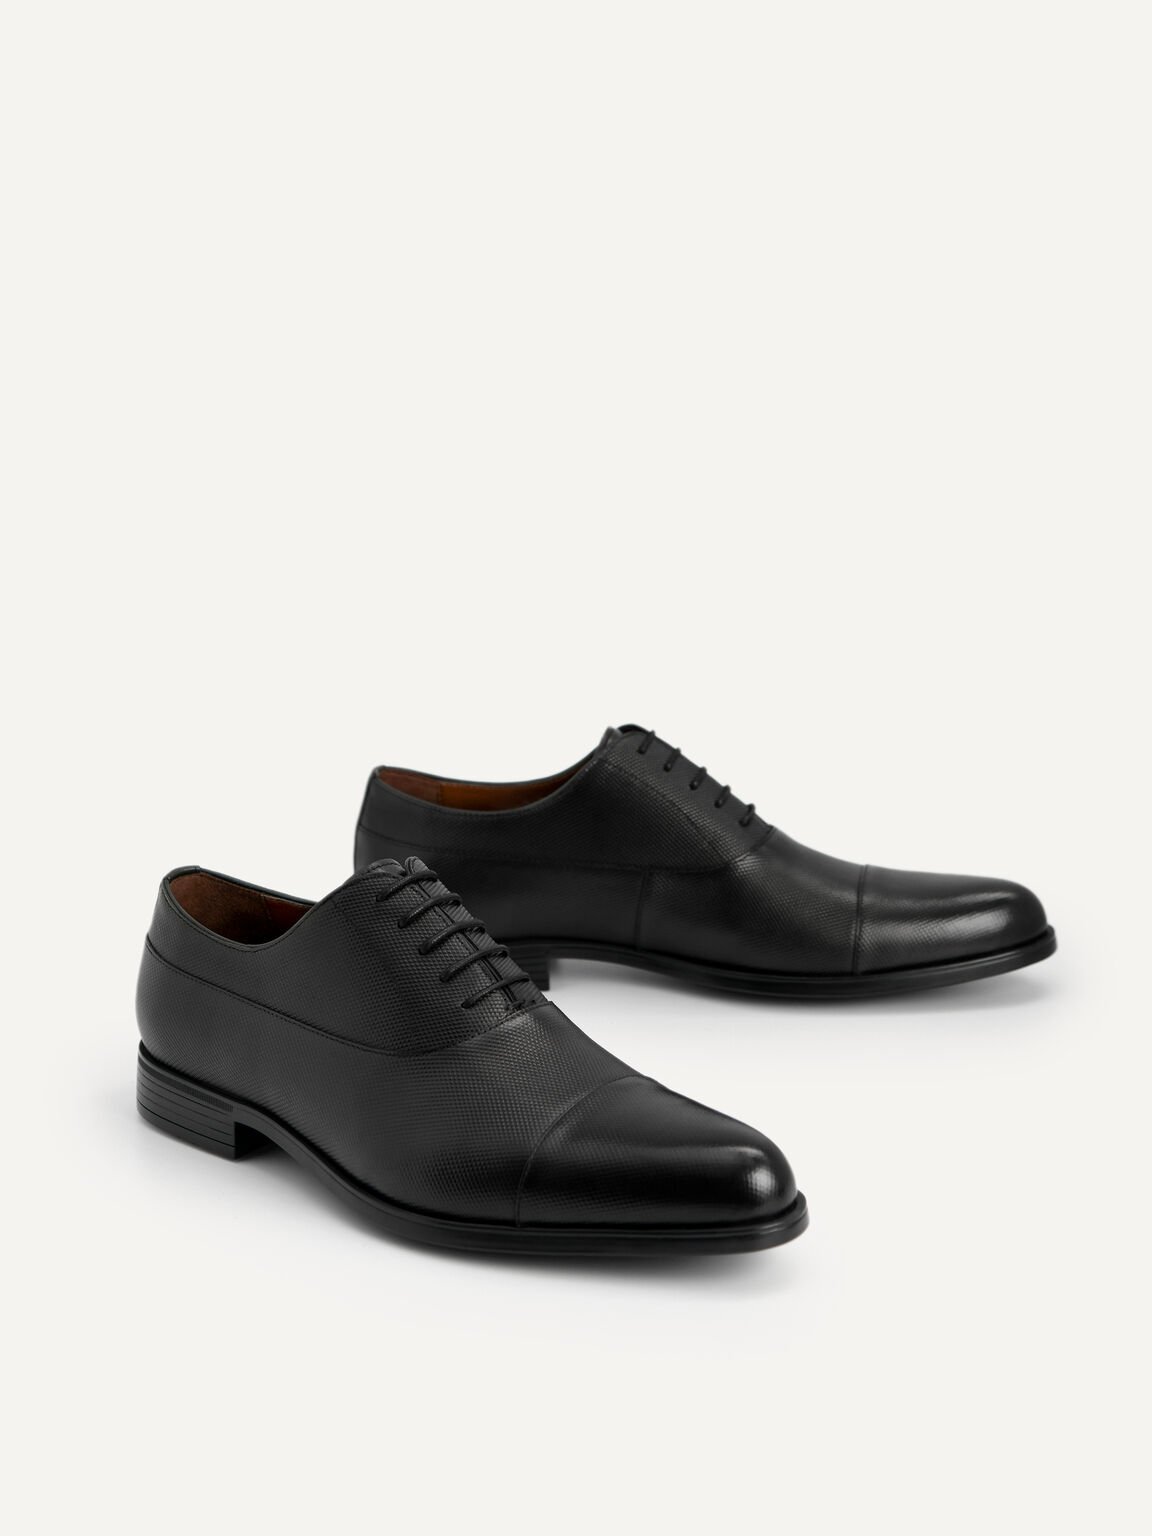 Textured Leather Cap Toe Derby Shoes, Black